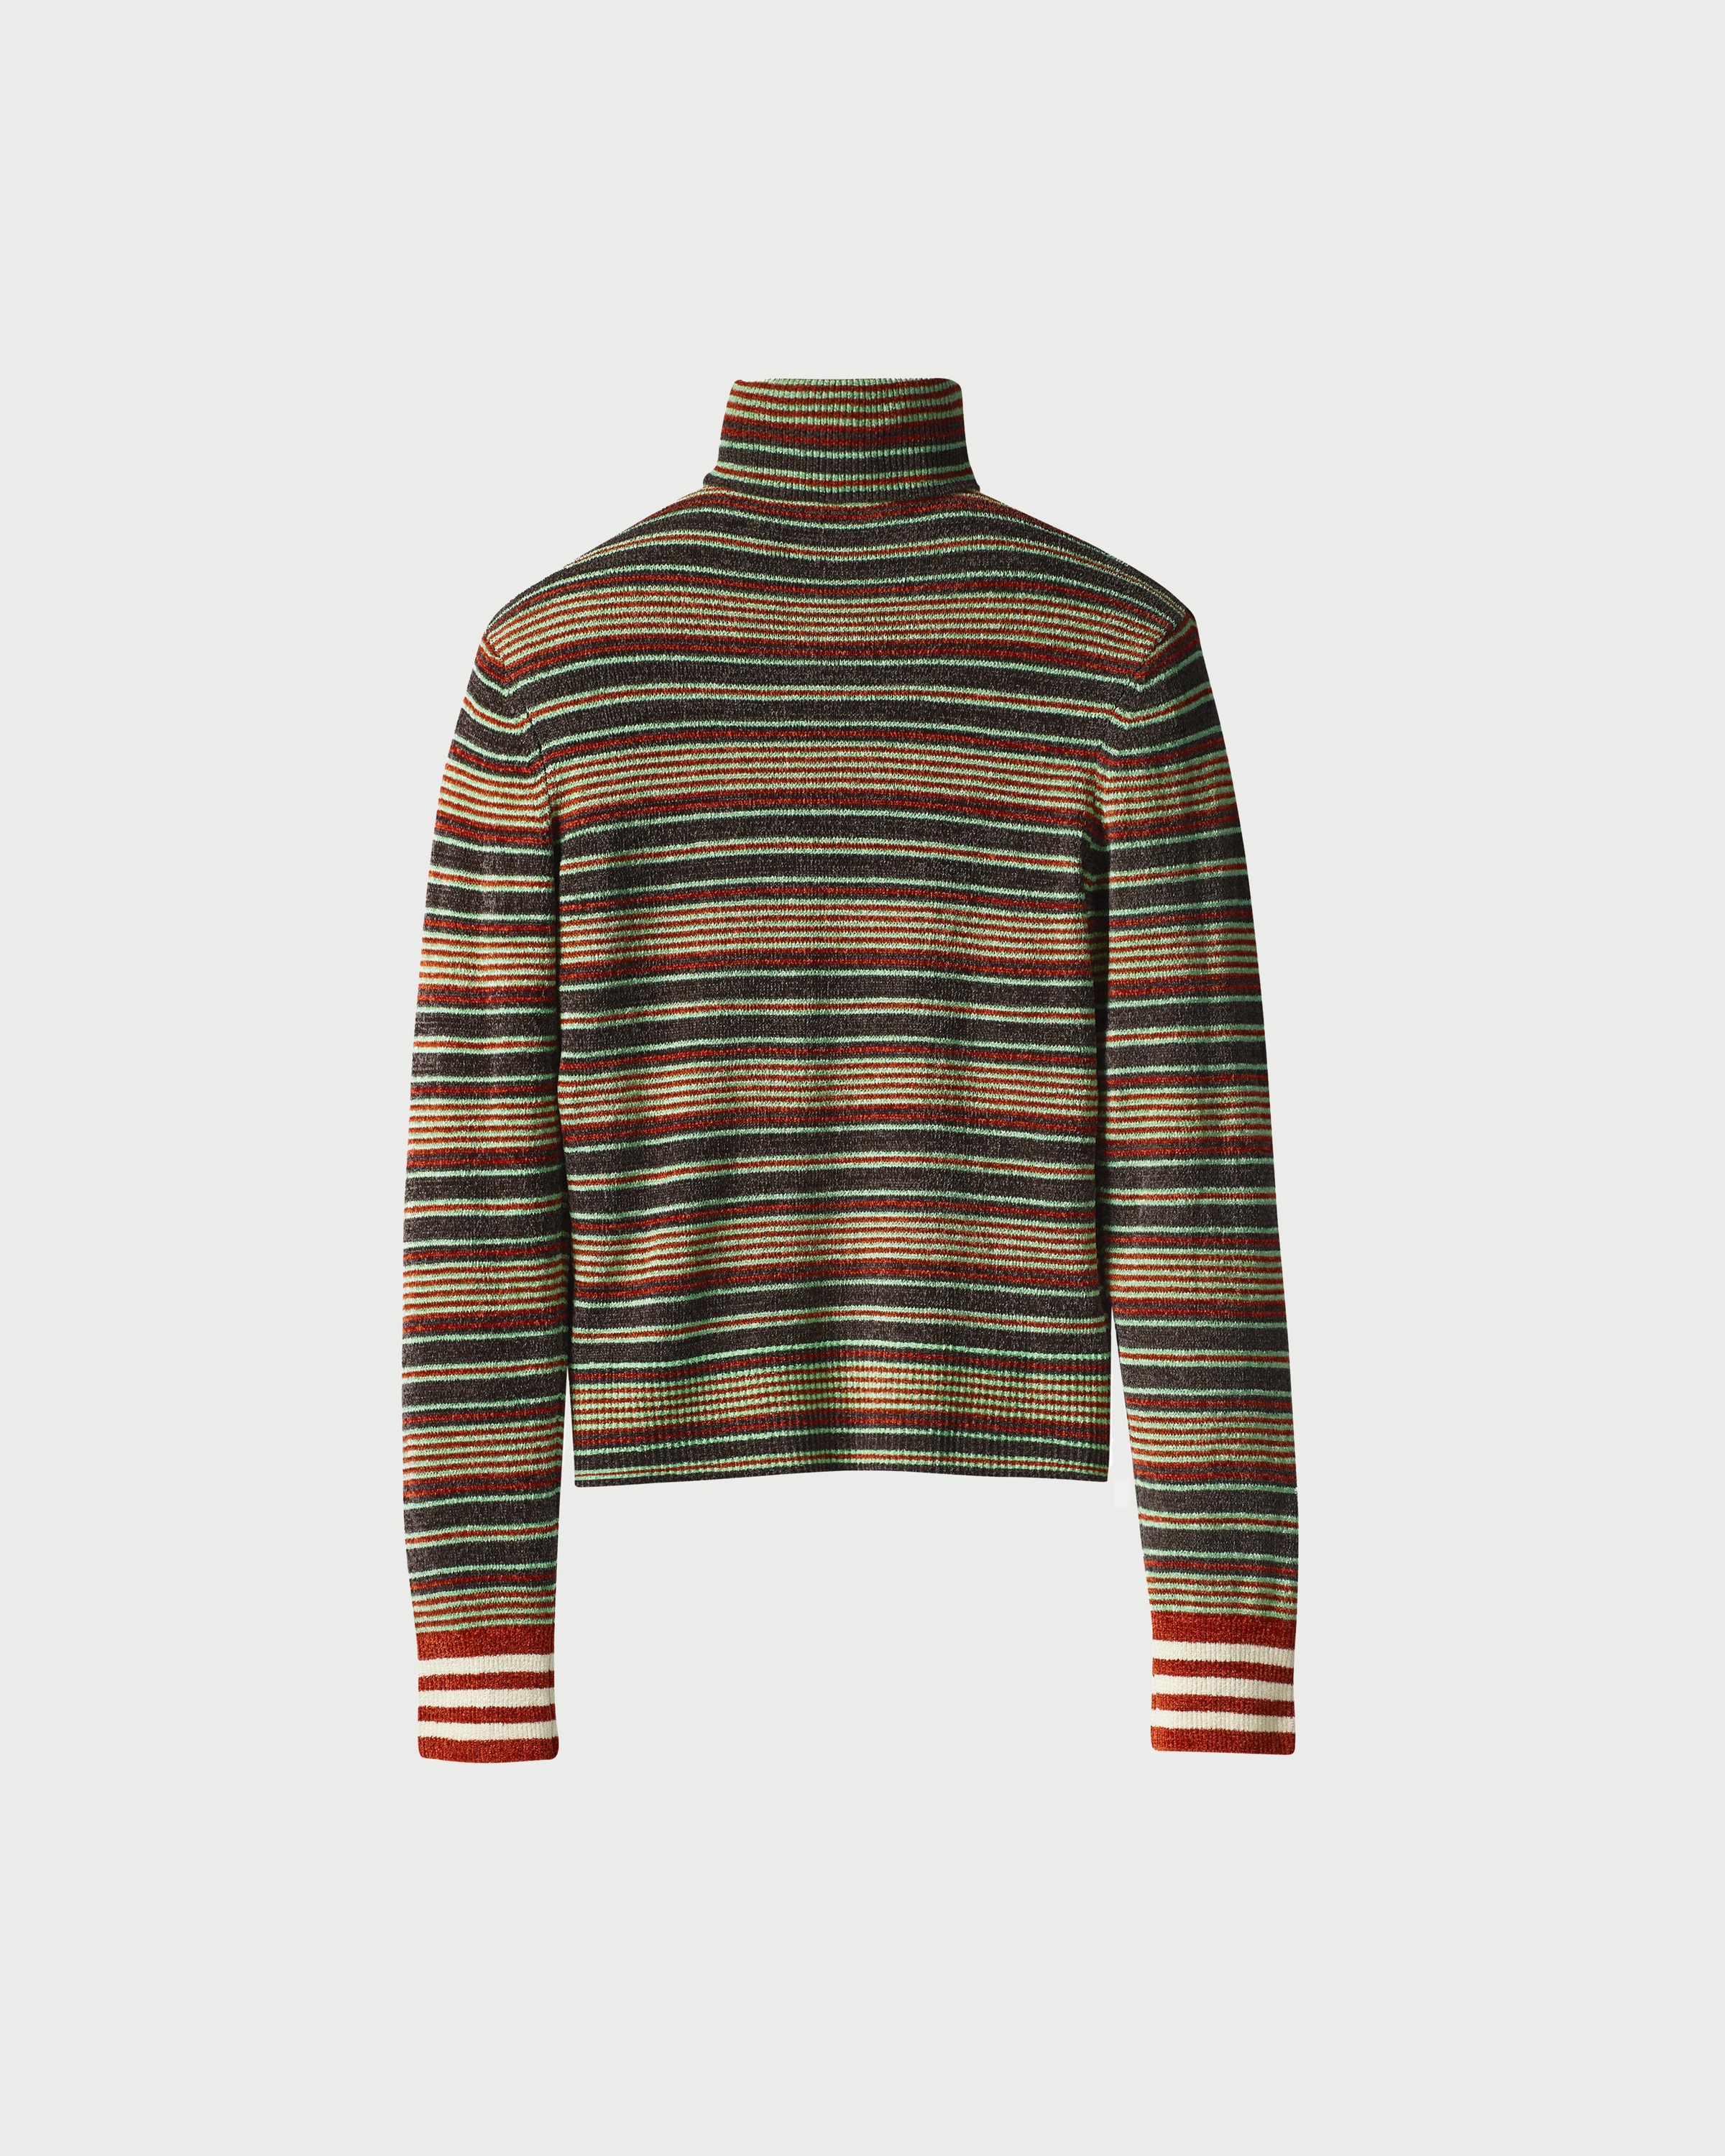 Adidas x Wales Bonner – Roll Neck Multi - Outerwear - Multi - Image 2